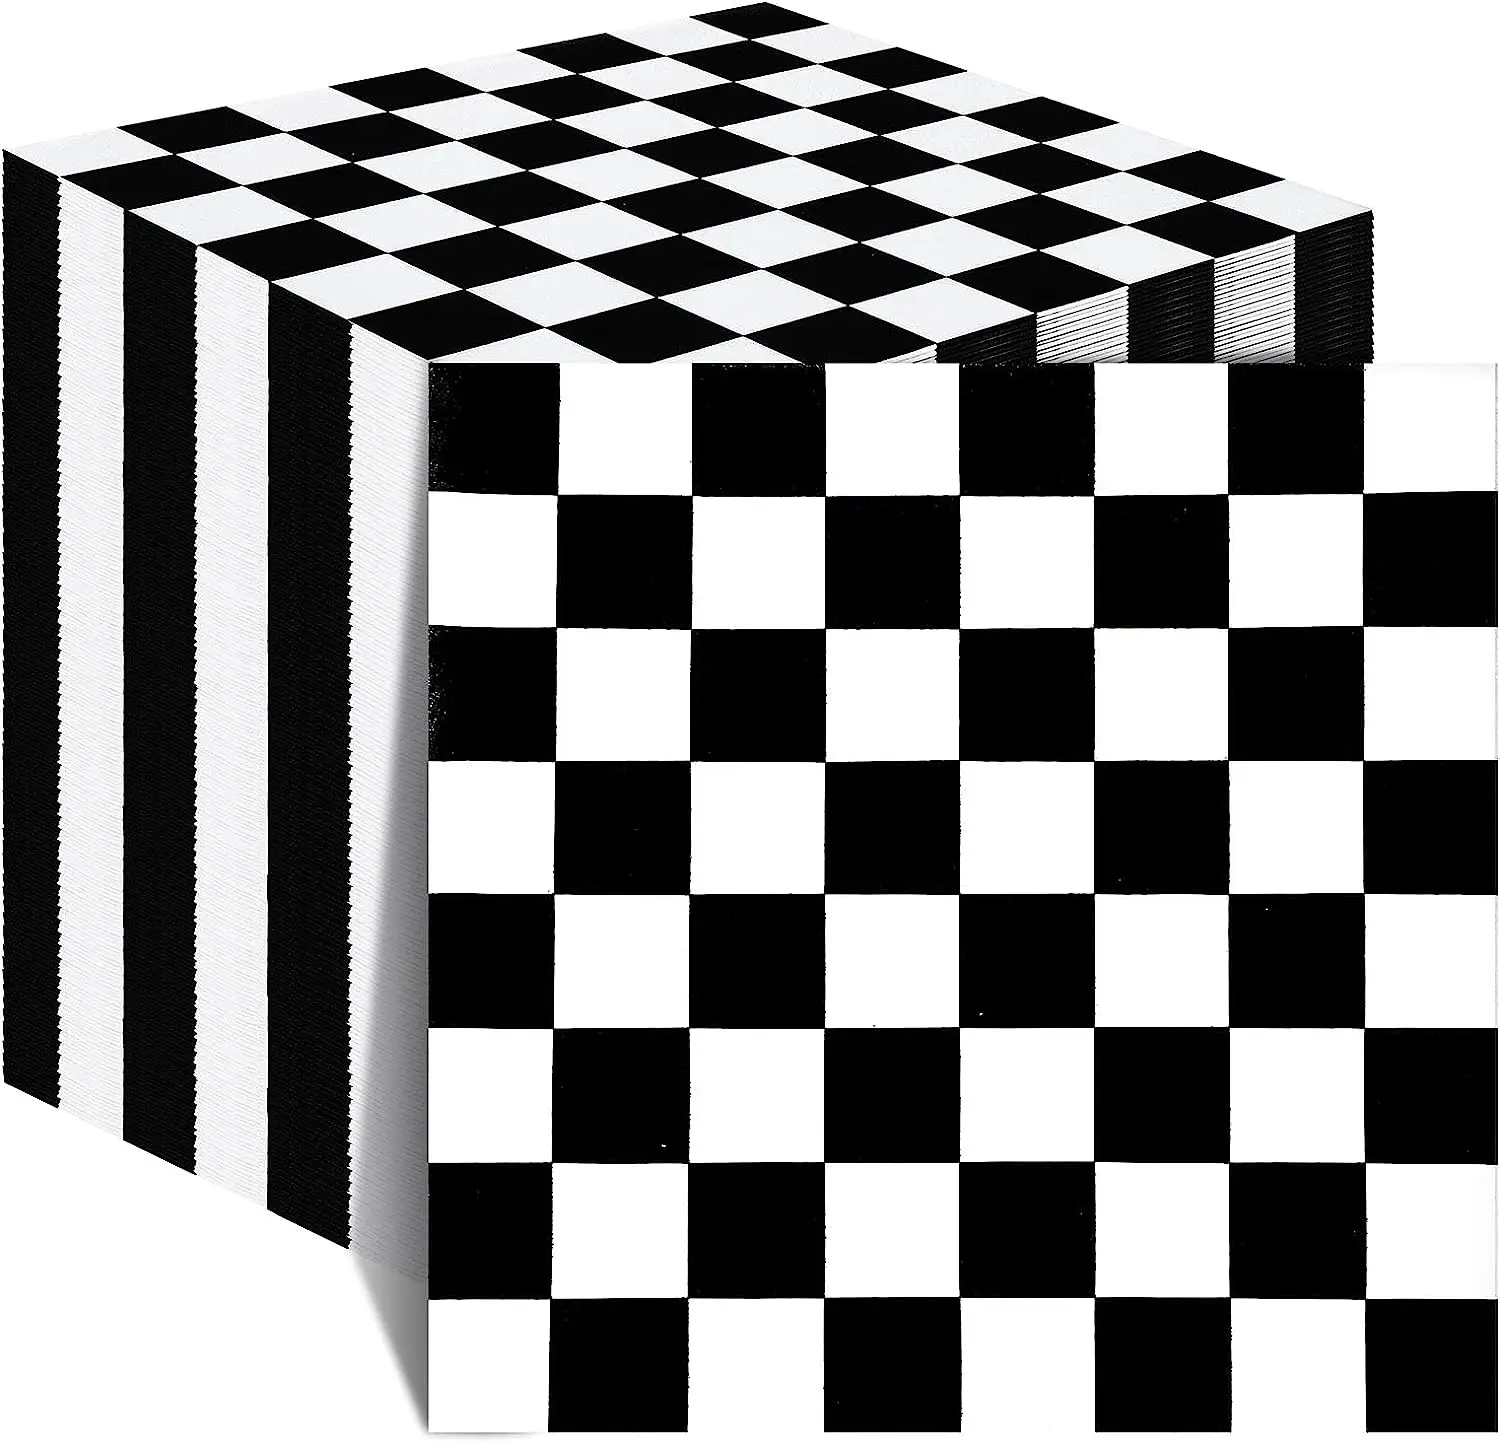 

100PCS Checkered Flag Paper Napkins Disposable Race Car Party Paper Towels,Black and White Checkered Decorative Napkin